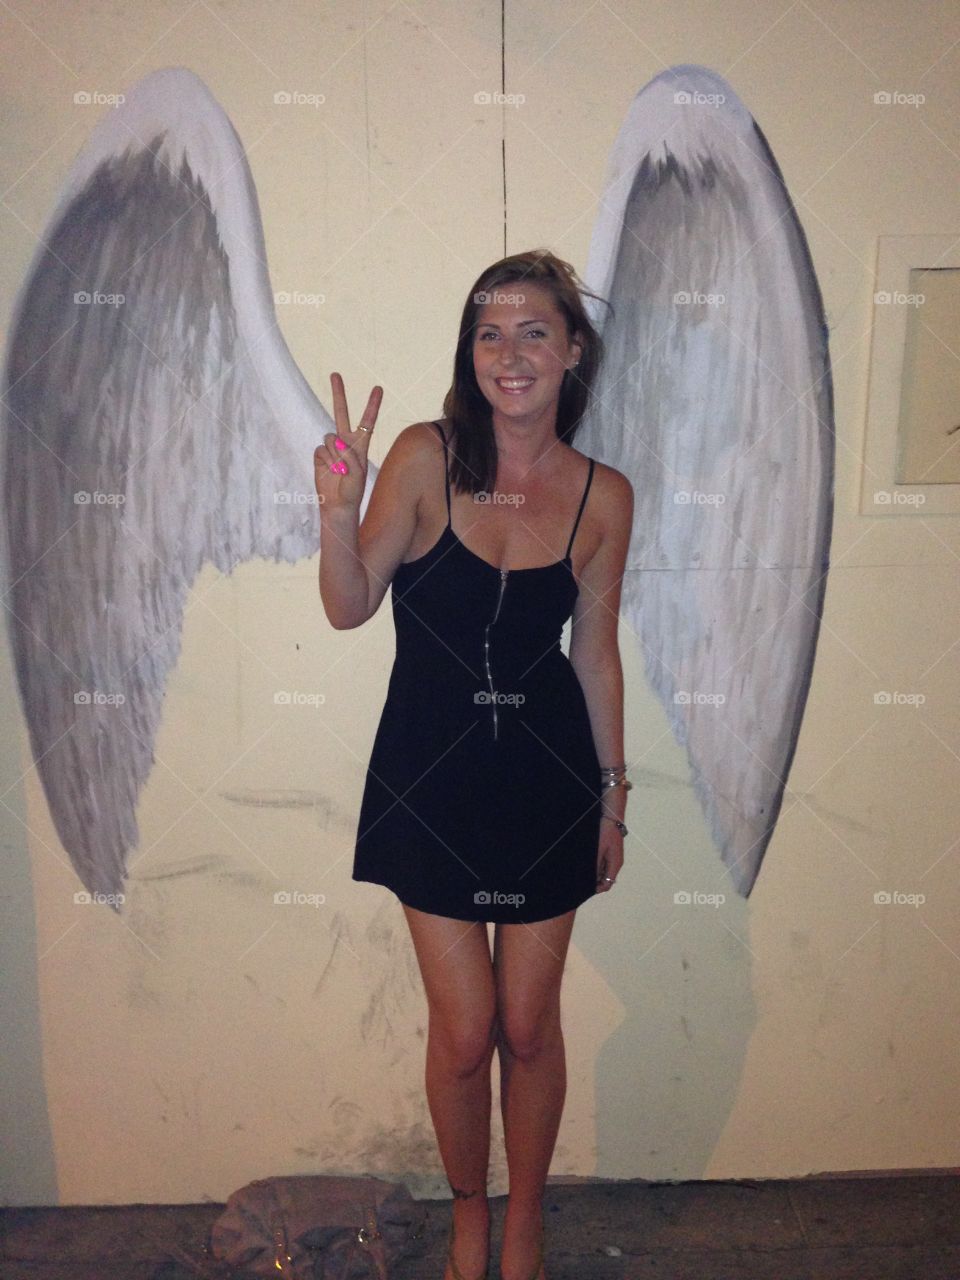 Woman gesturing v sign in front of wings painted on wall